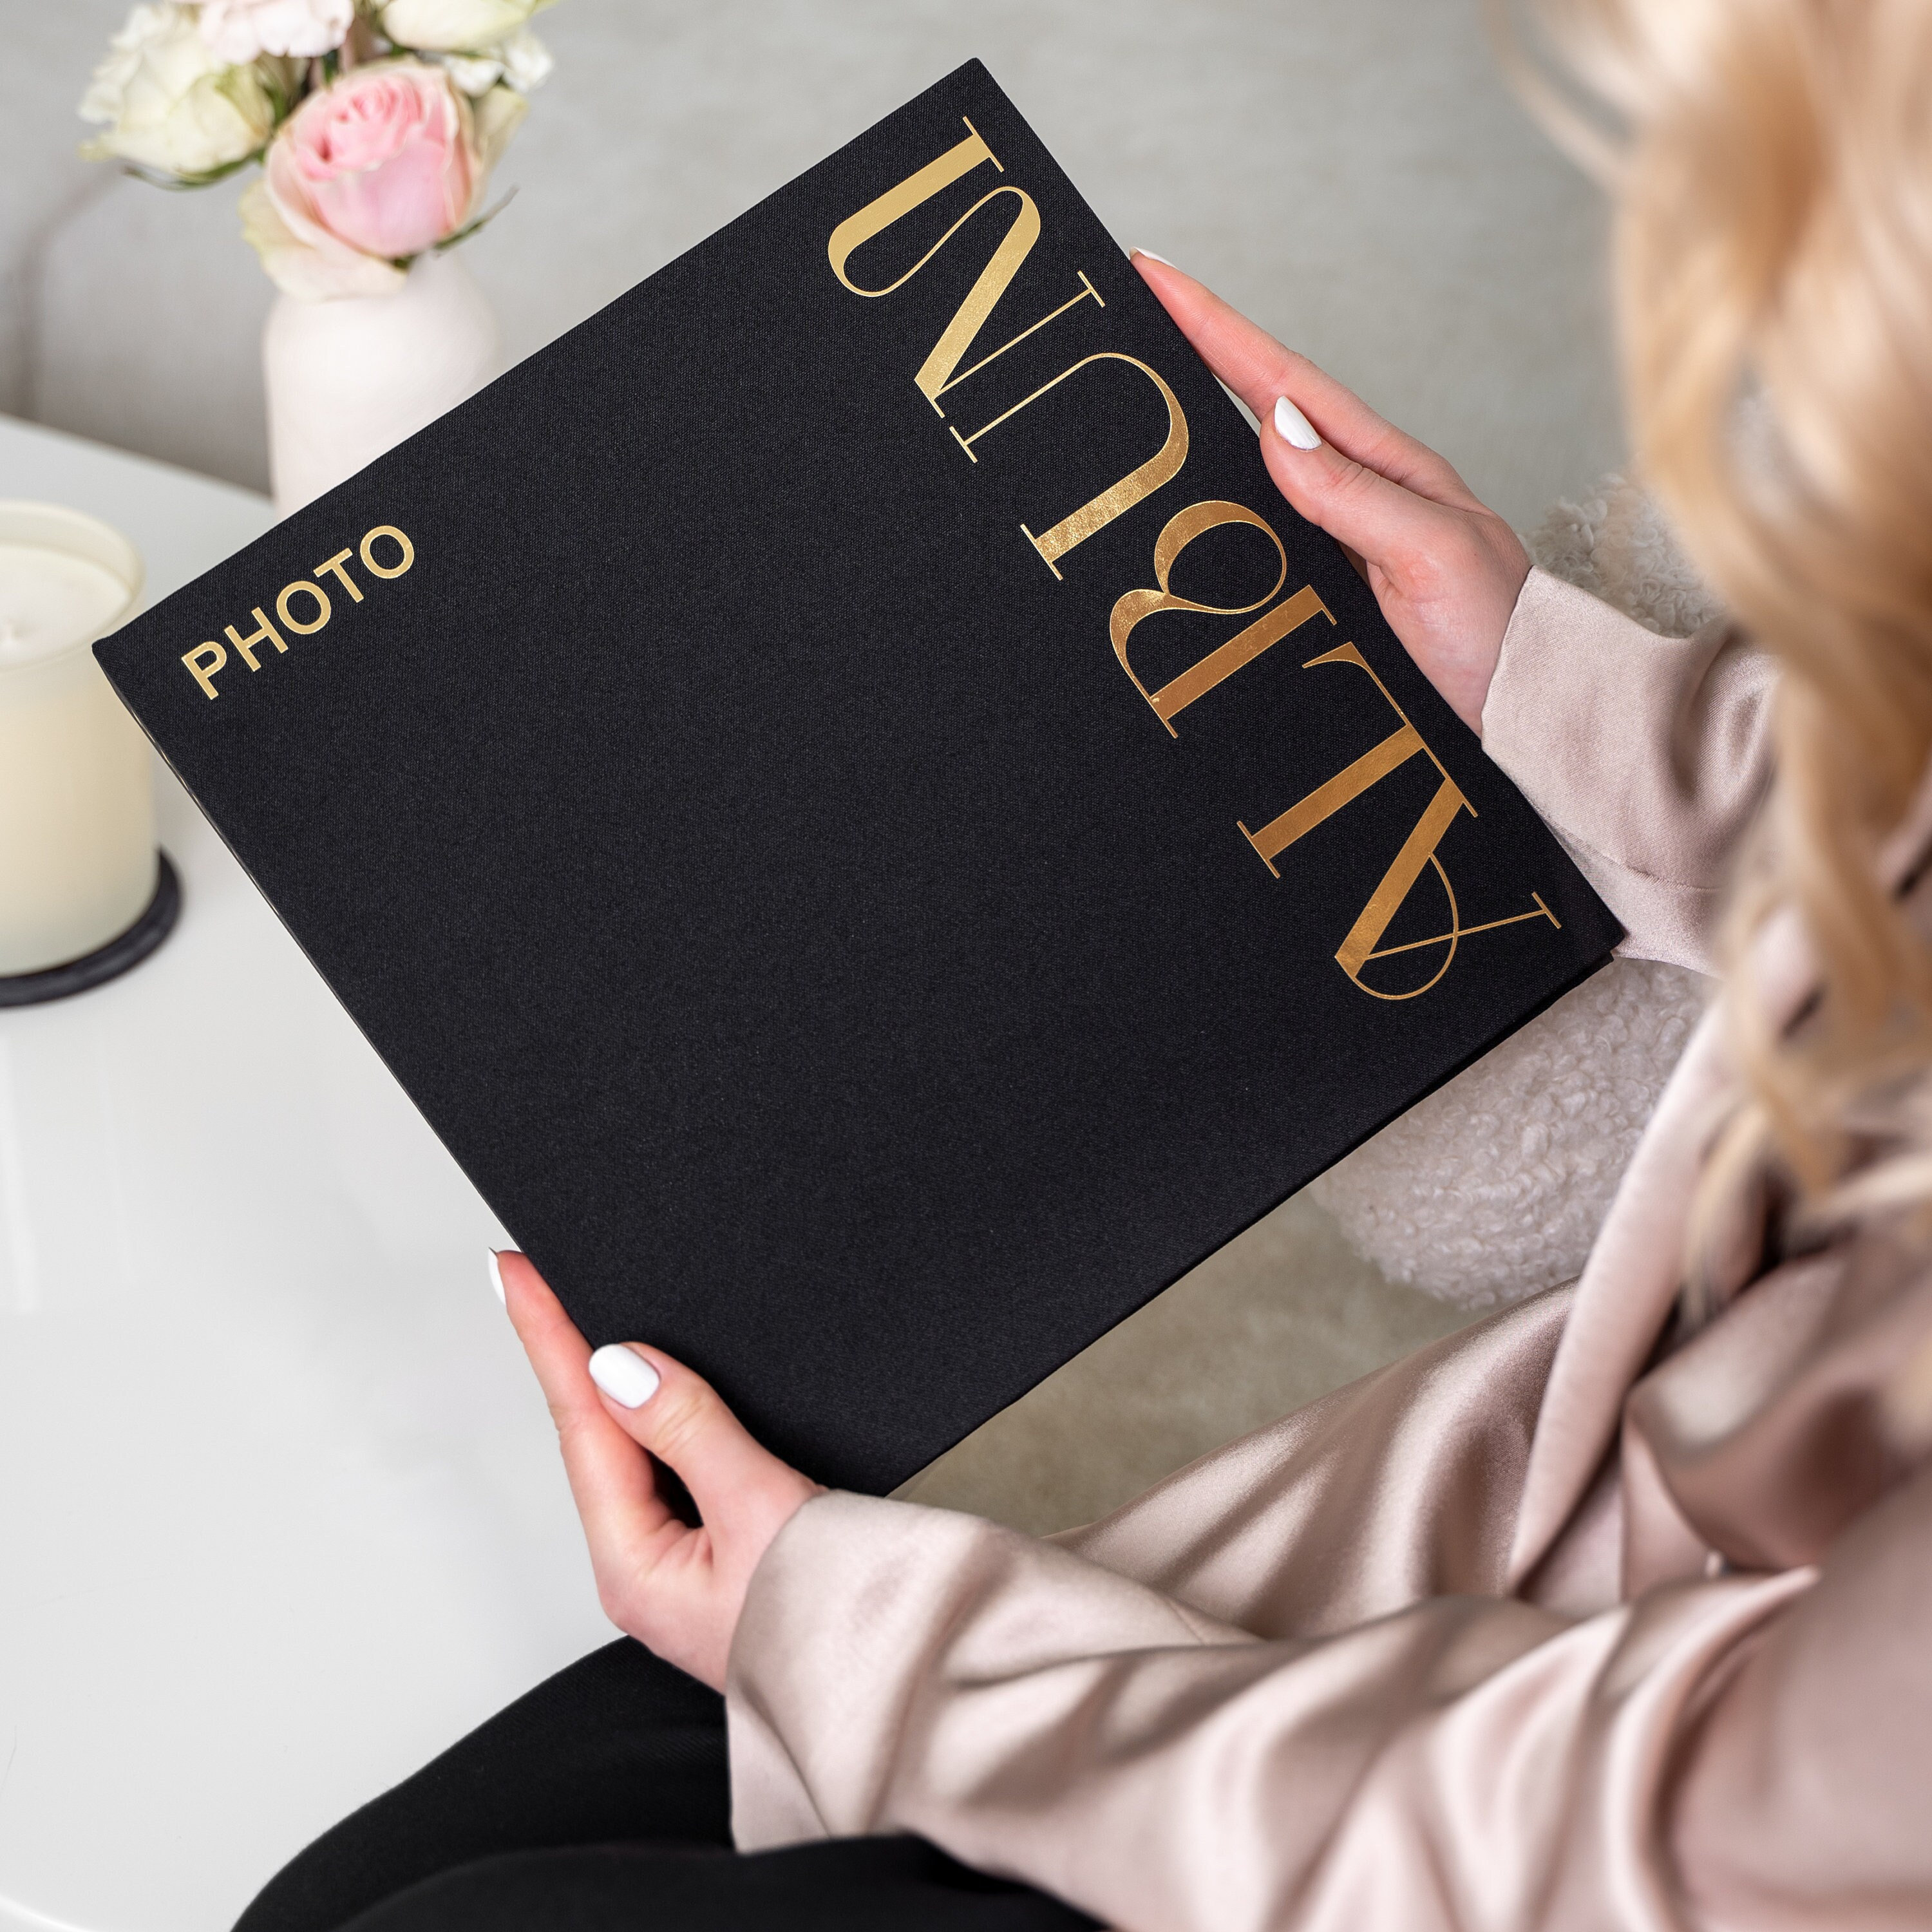 Turn your wedding photos into a stunning coffee table art book